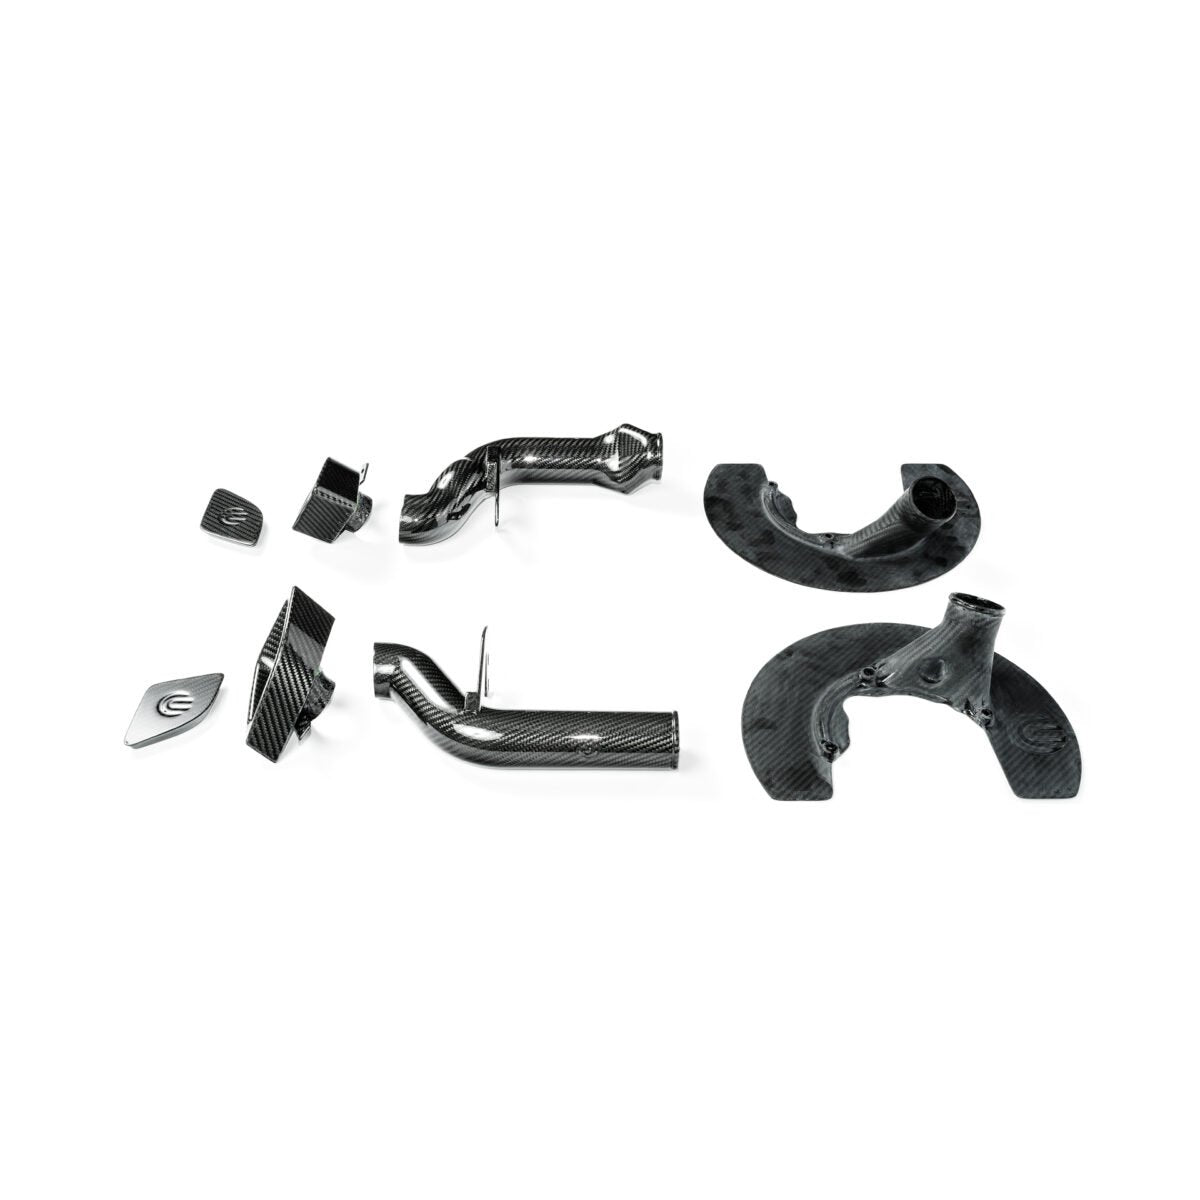 Unplugged Performance - Model S plaid Carbon Fibre Racing Brake Duct Kit (front) 2021+.